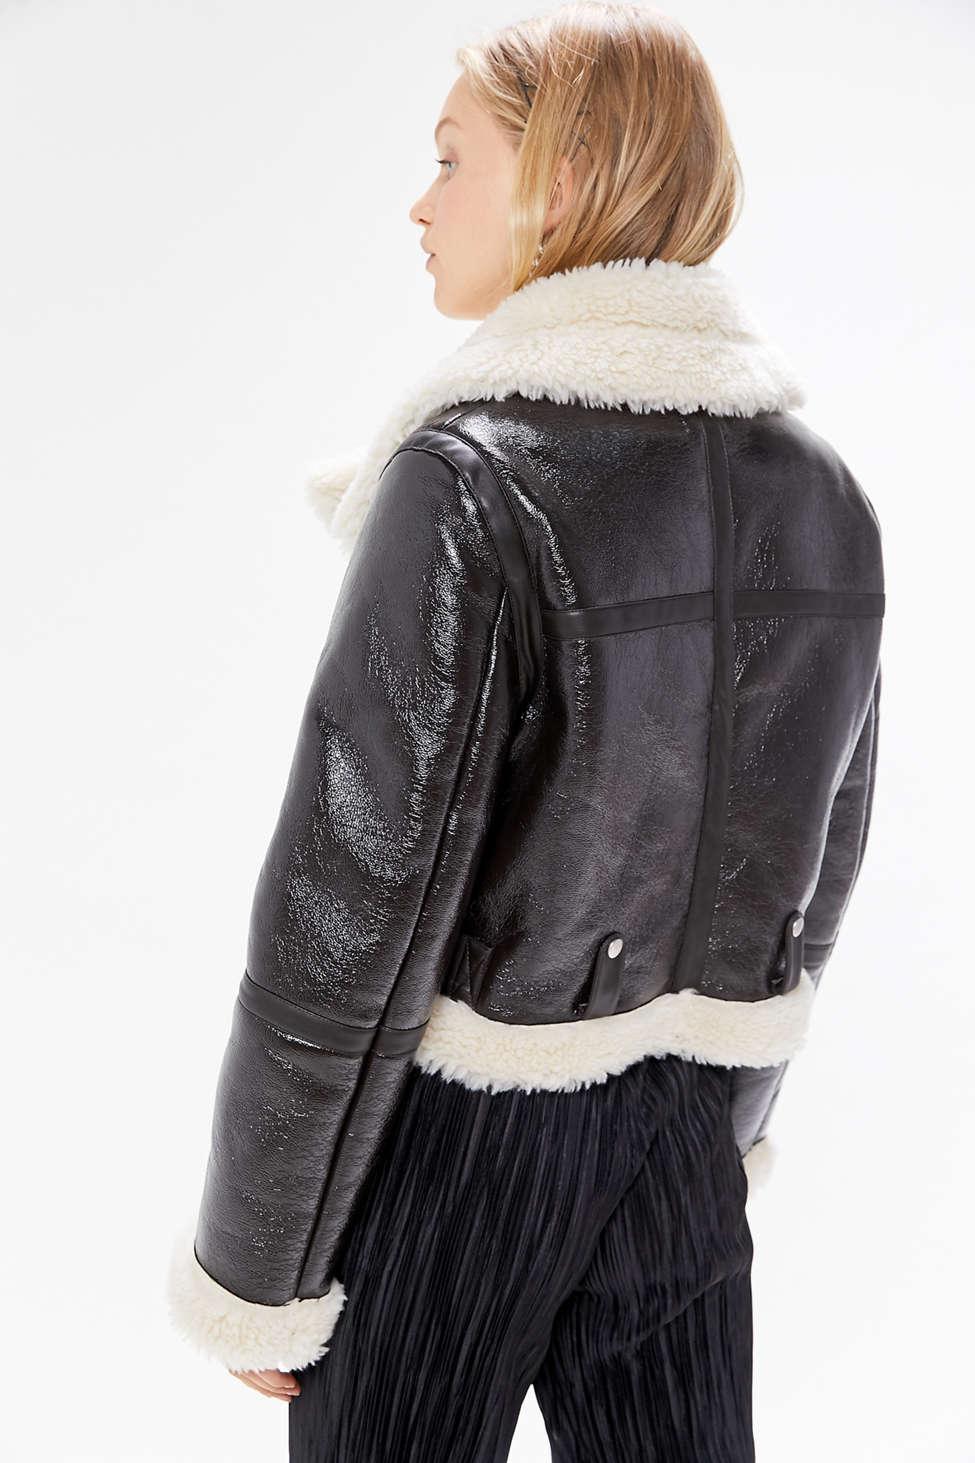 Urban Outfitters Uo Classic Sherpa Lined Aviator Jacket | Lyst